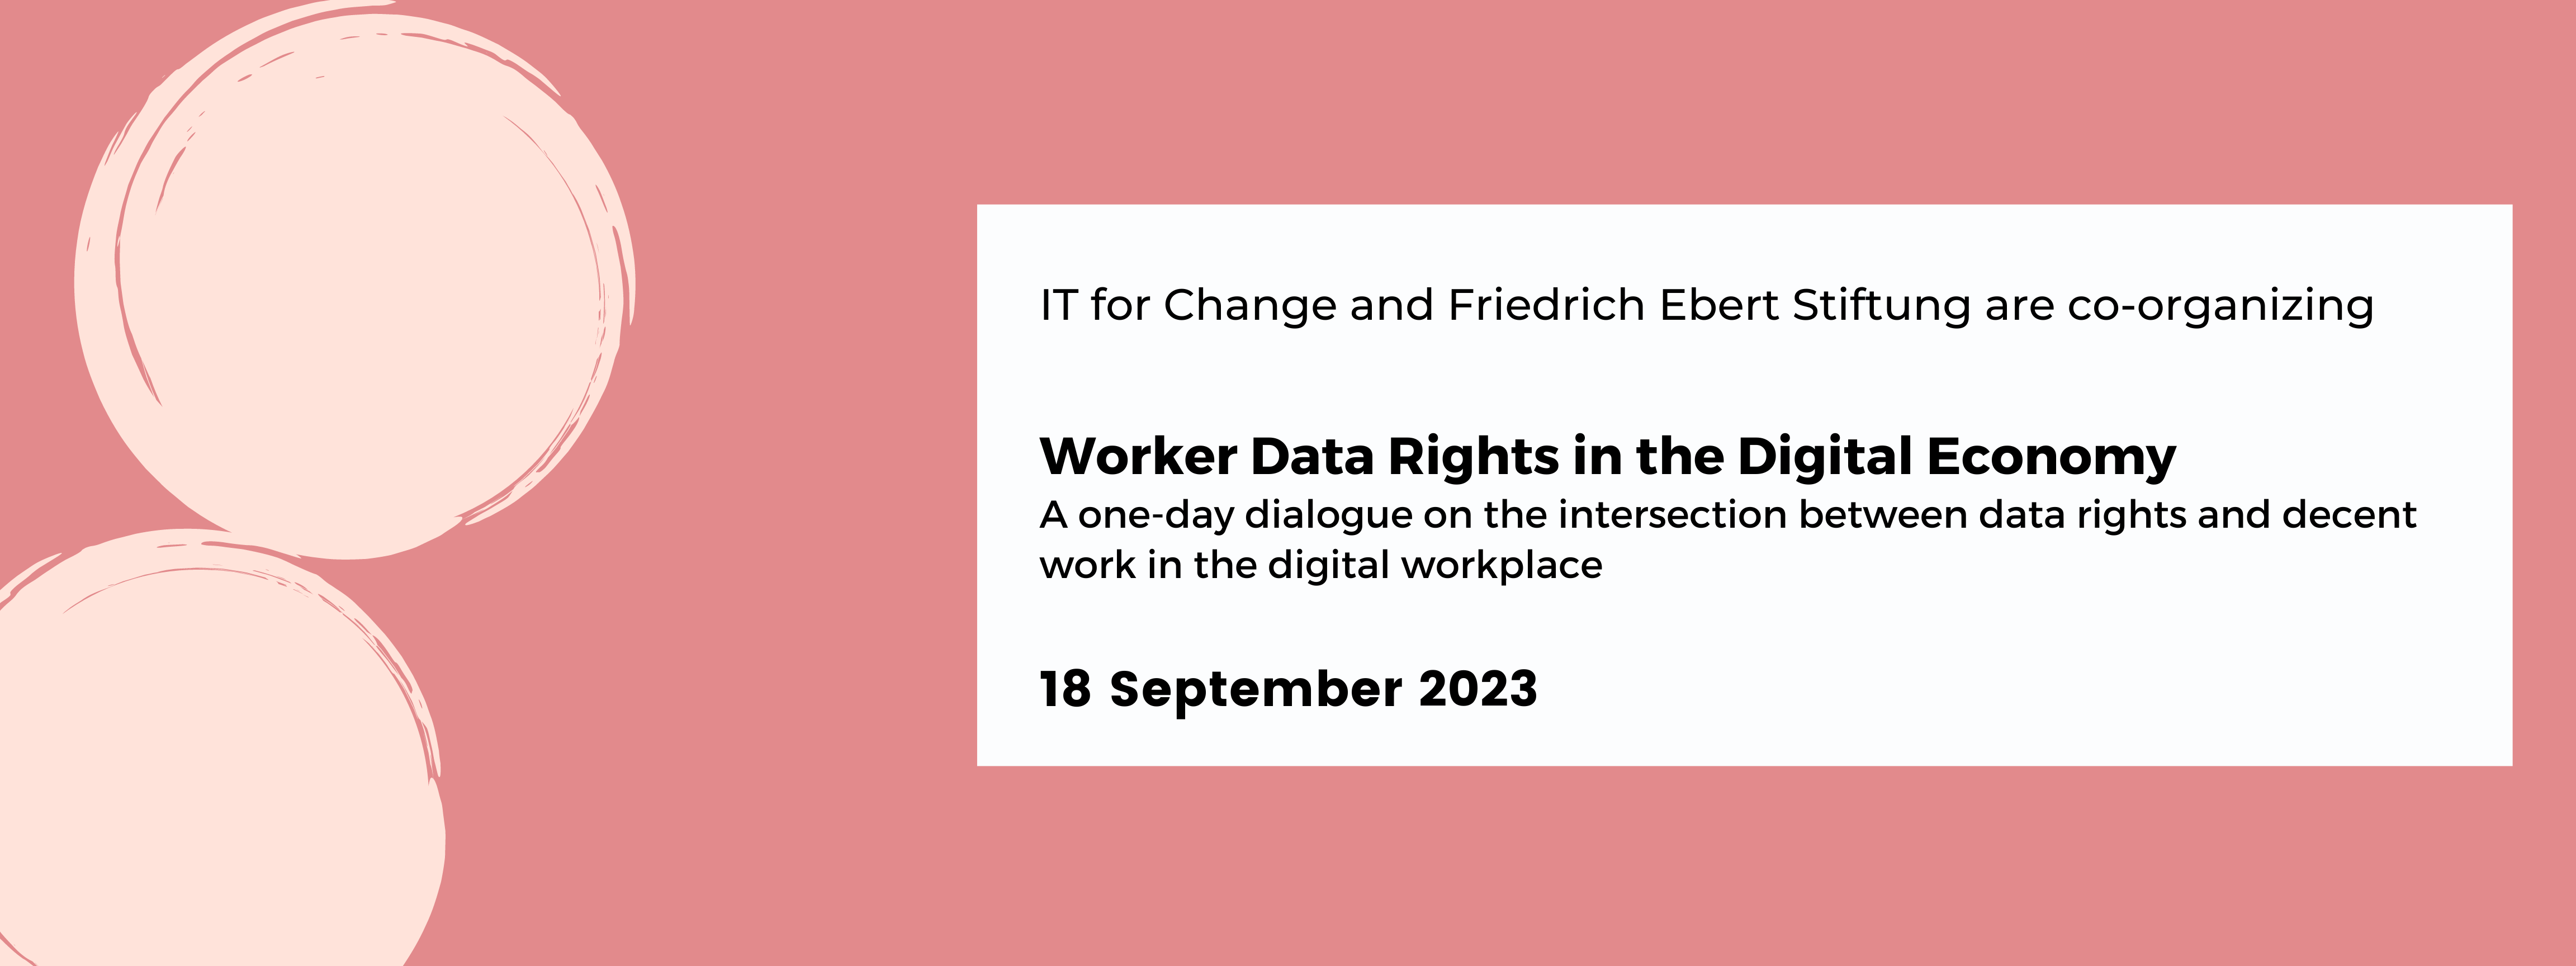 Worker Data Rights in the Digital Economy